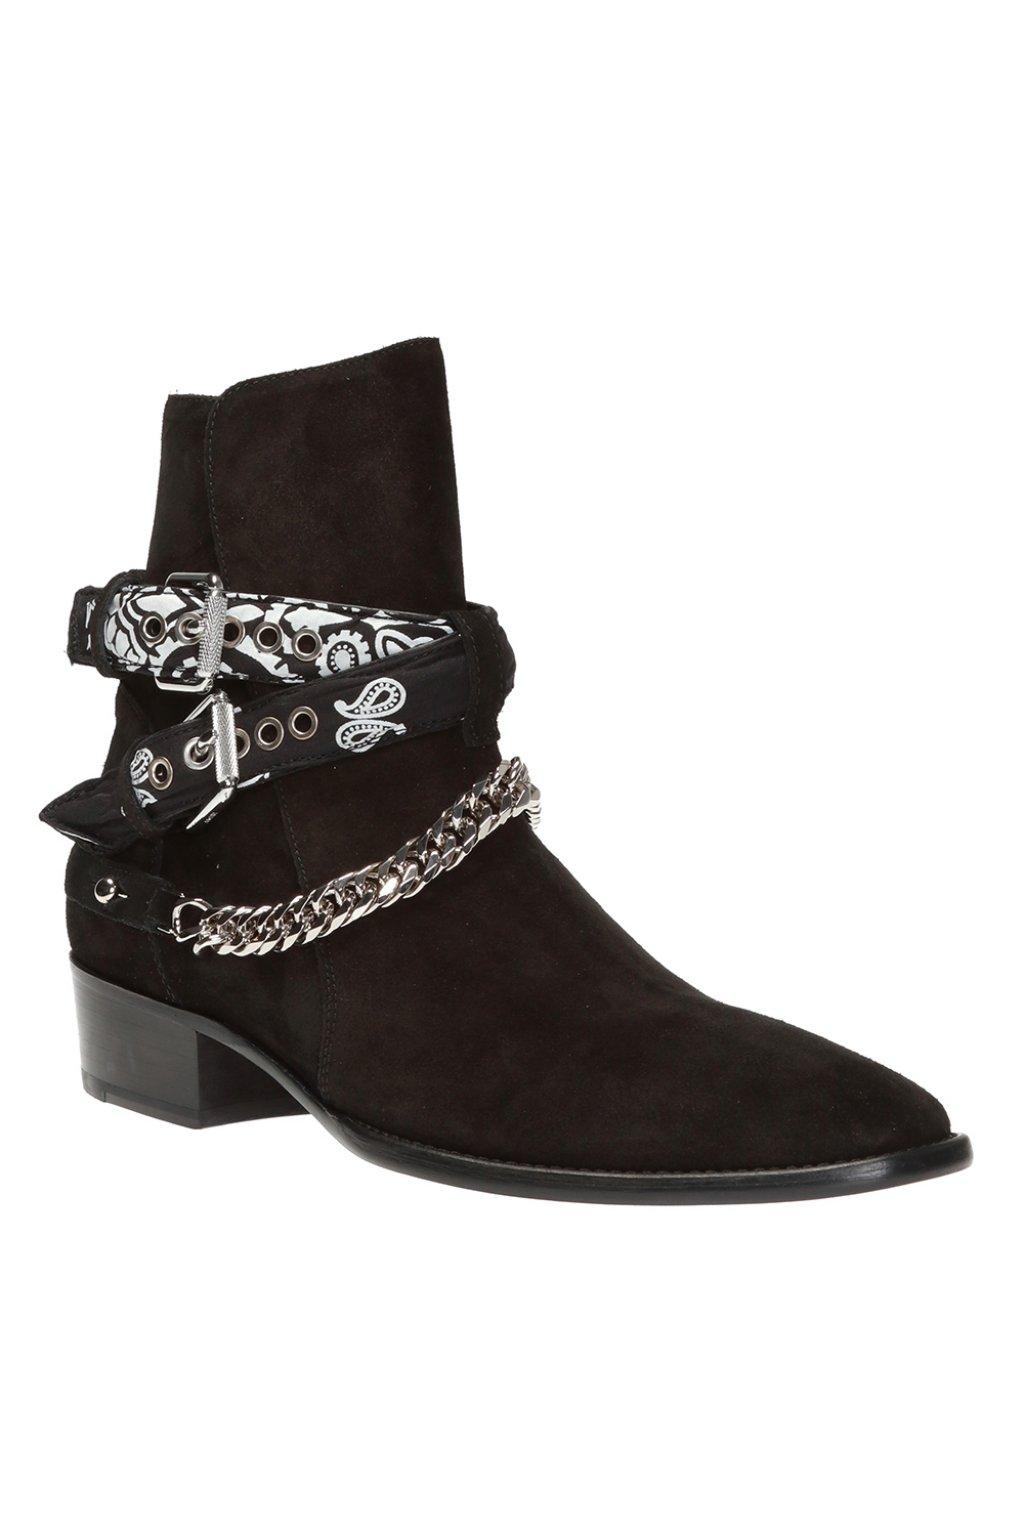 Amiri Leather Paisley Ankle Boots in Black for Men - Lyst